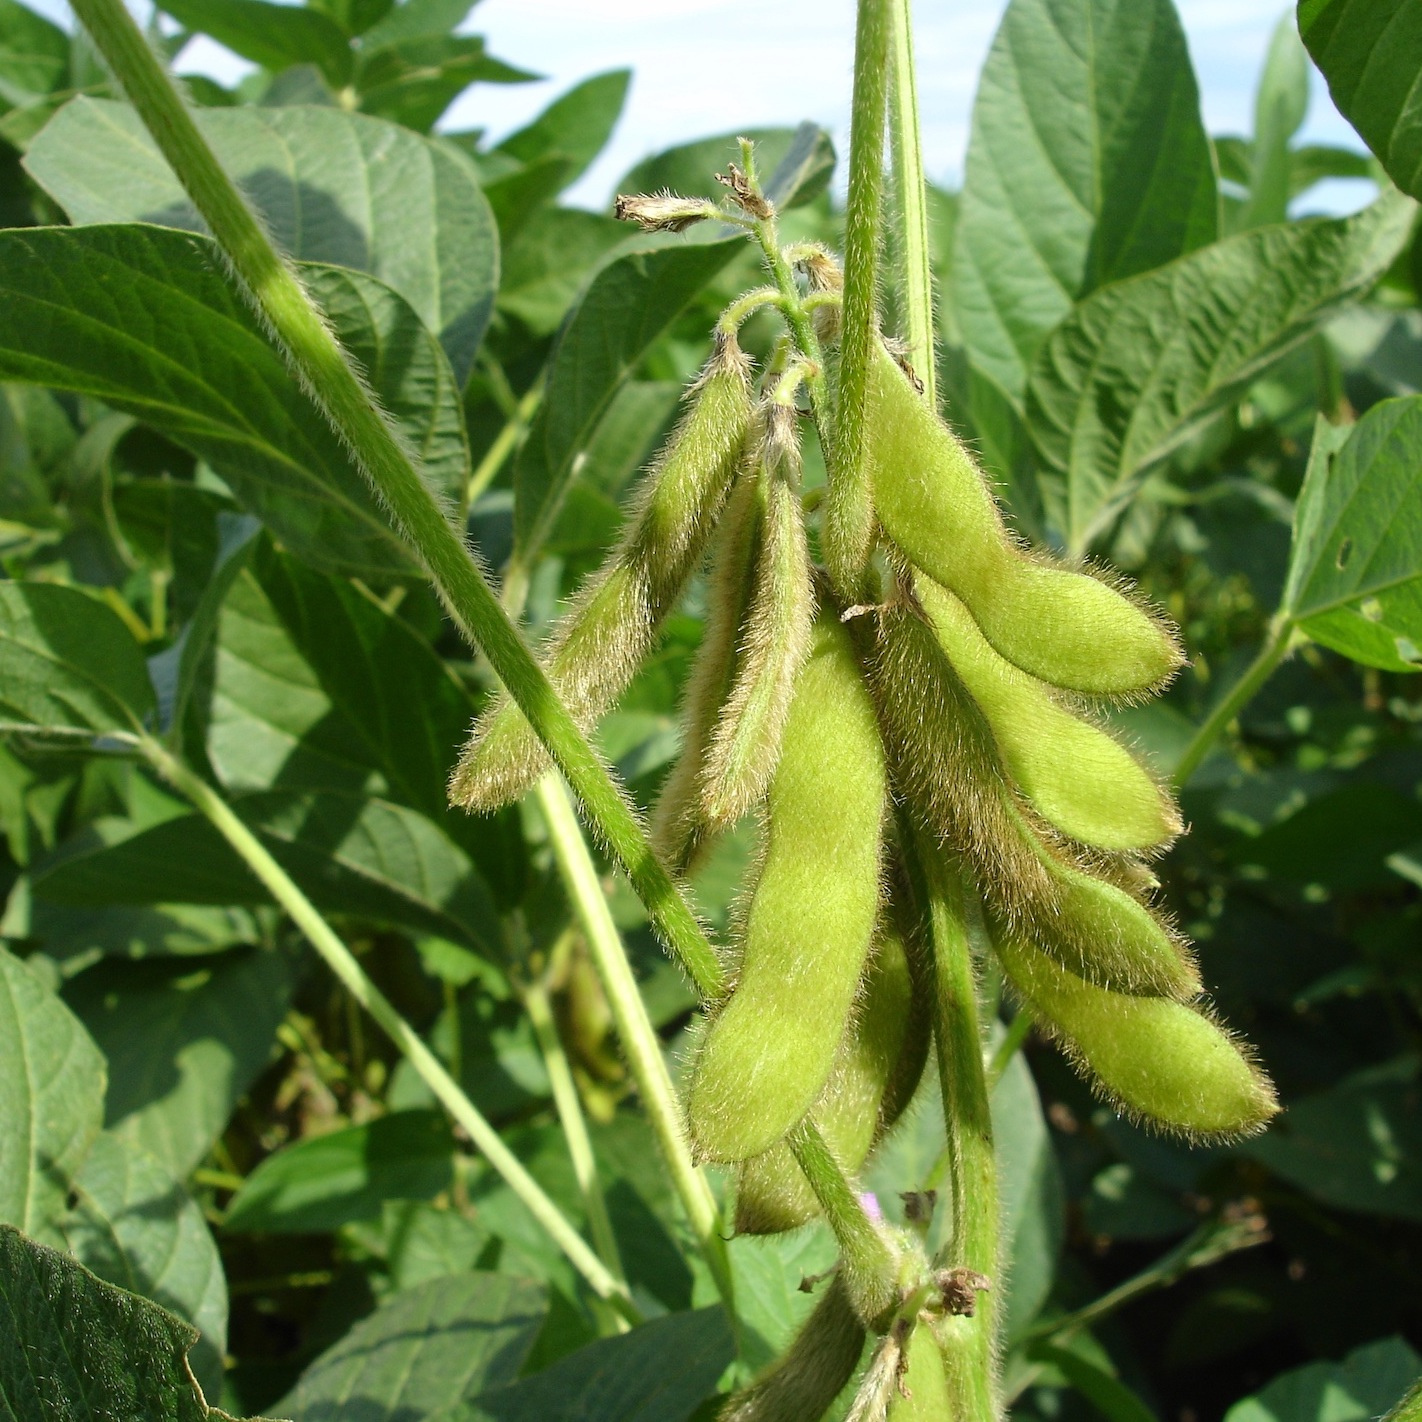 soybean pods